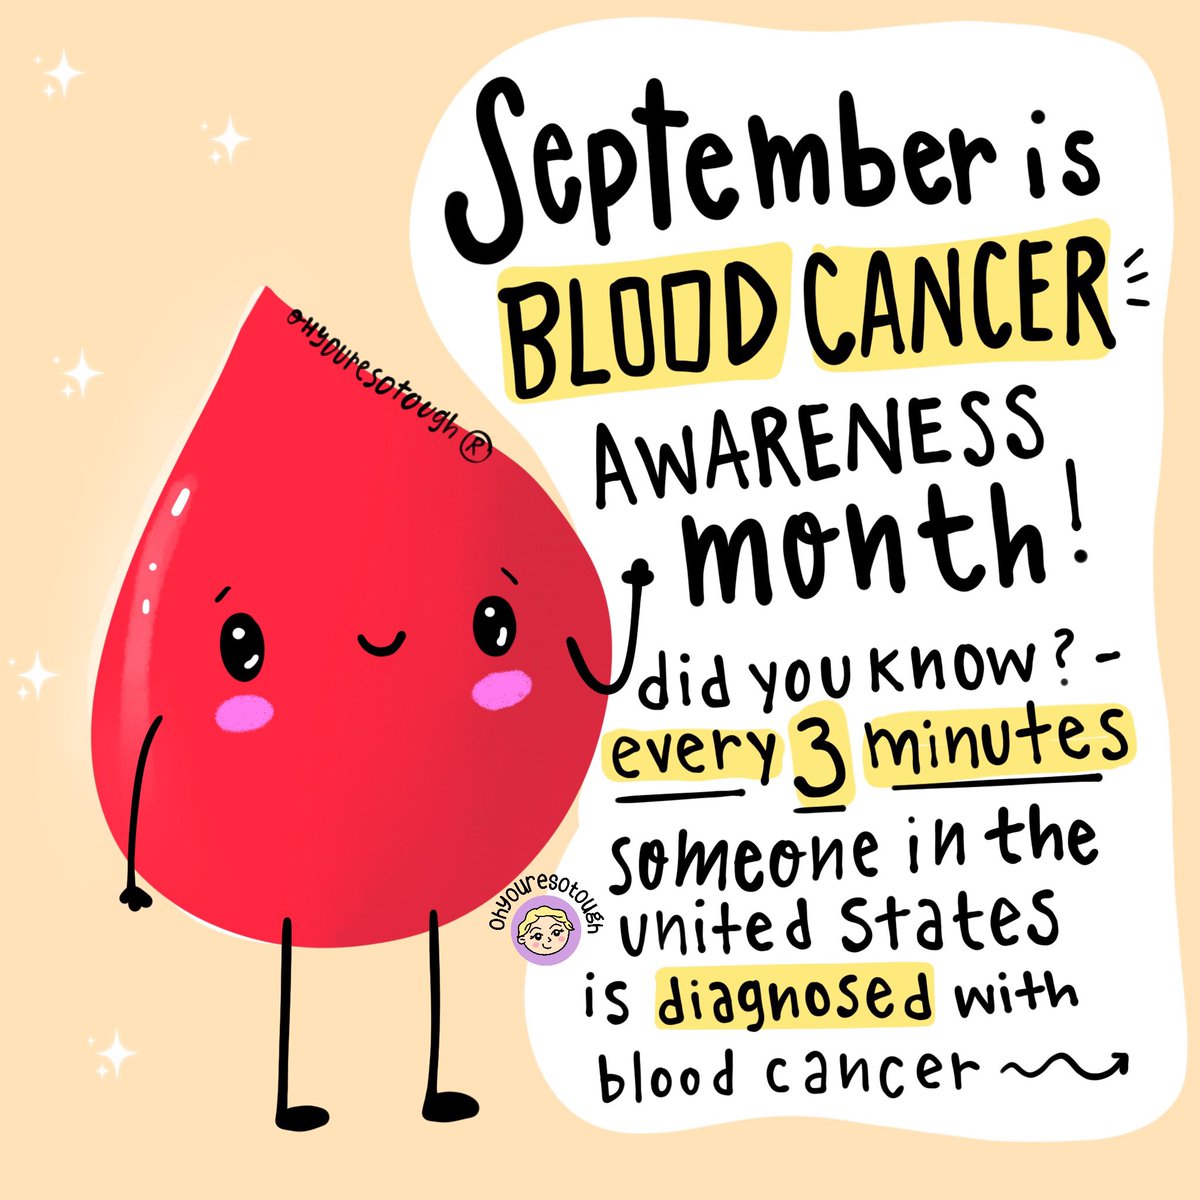 I am a two time survivor of blood cancer so this is close to my heart. Awareness is key🔑❤️ #bloodcancerawarenessmonth